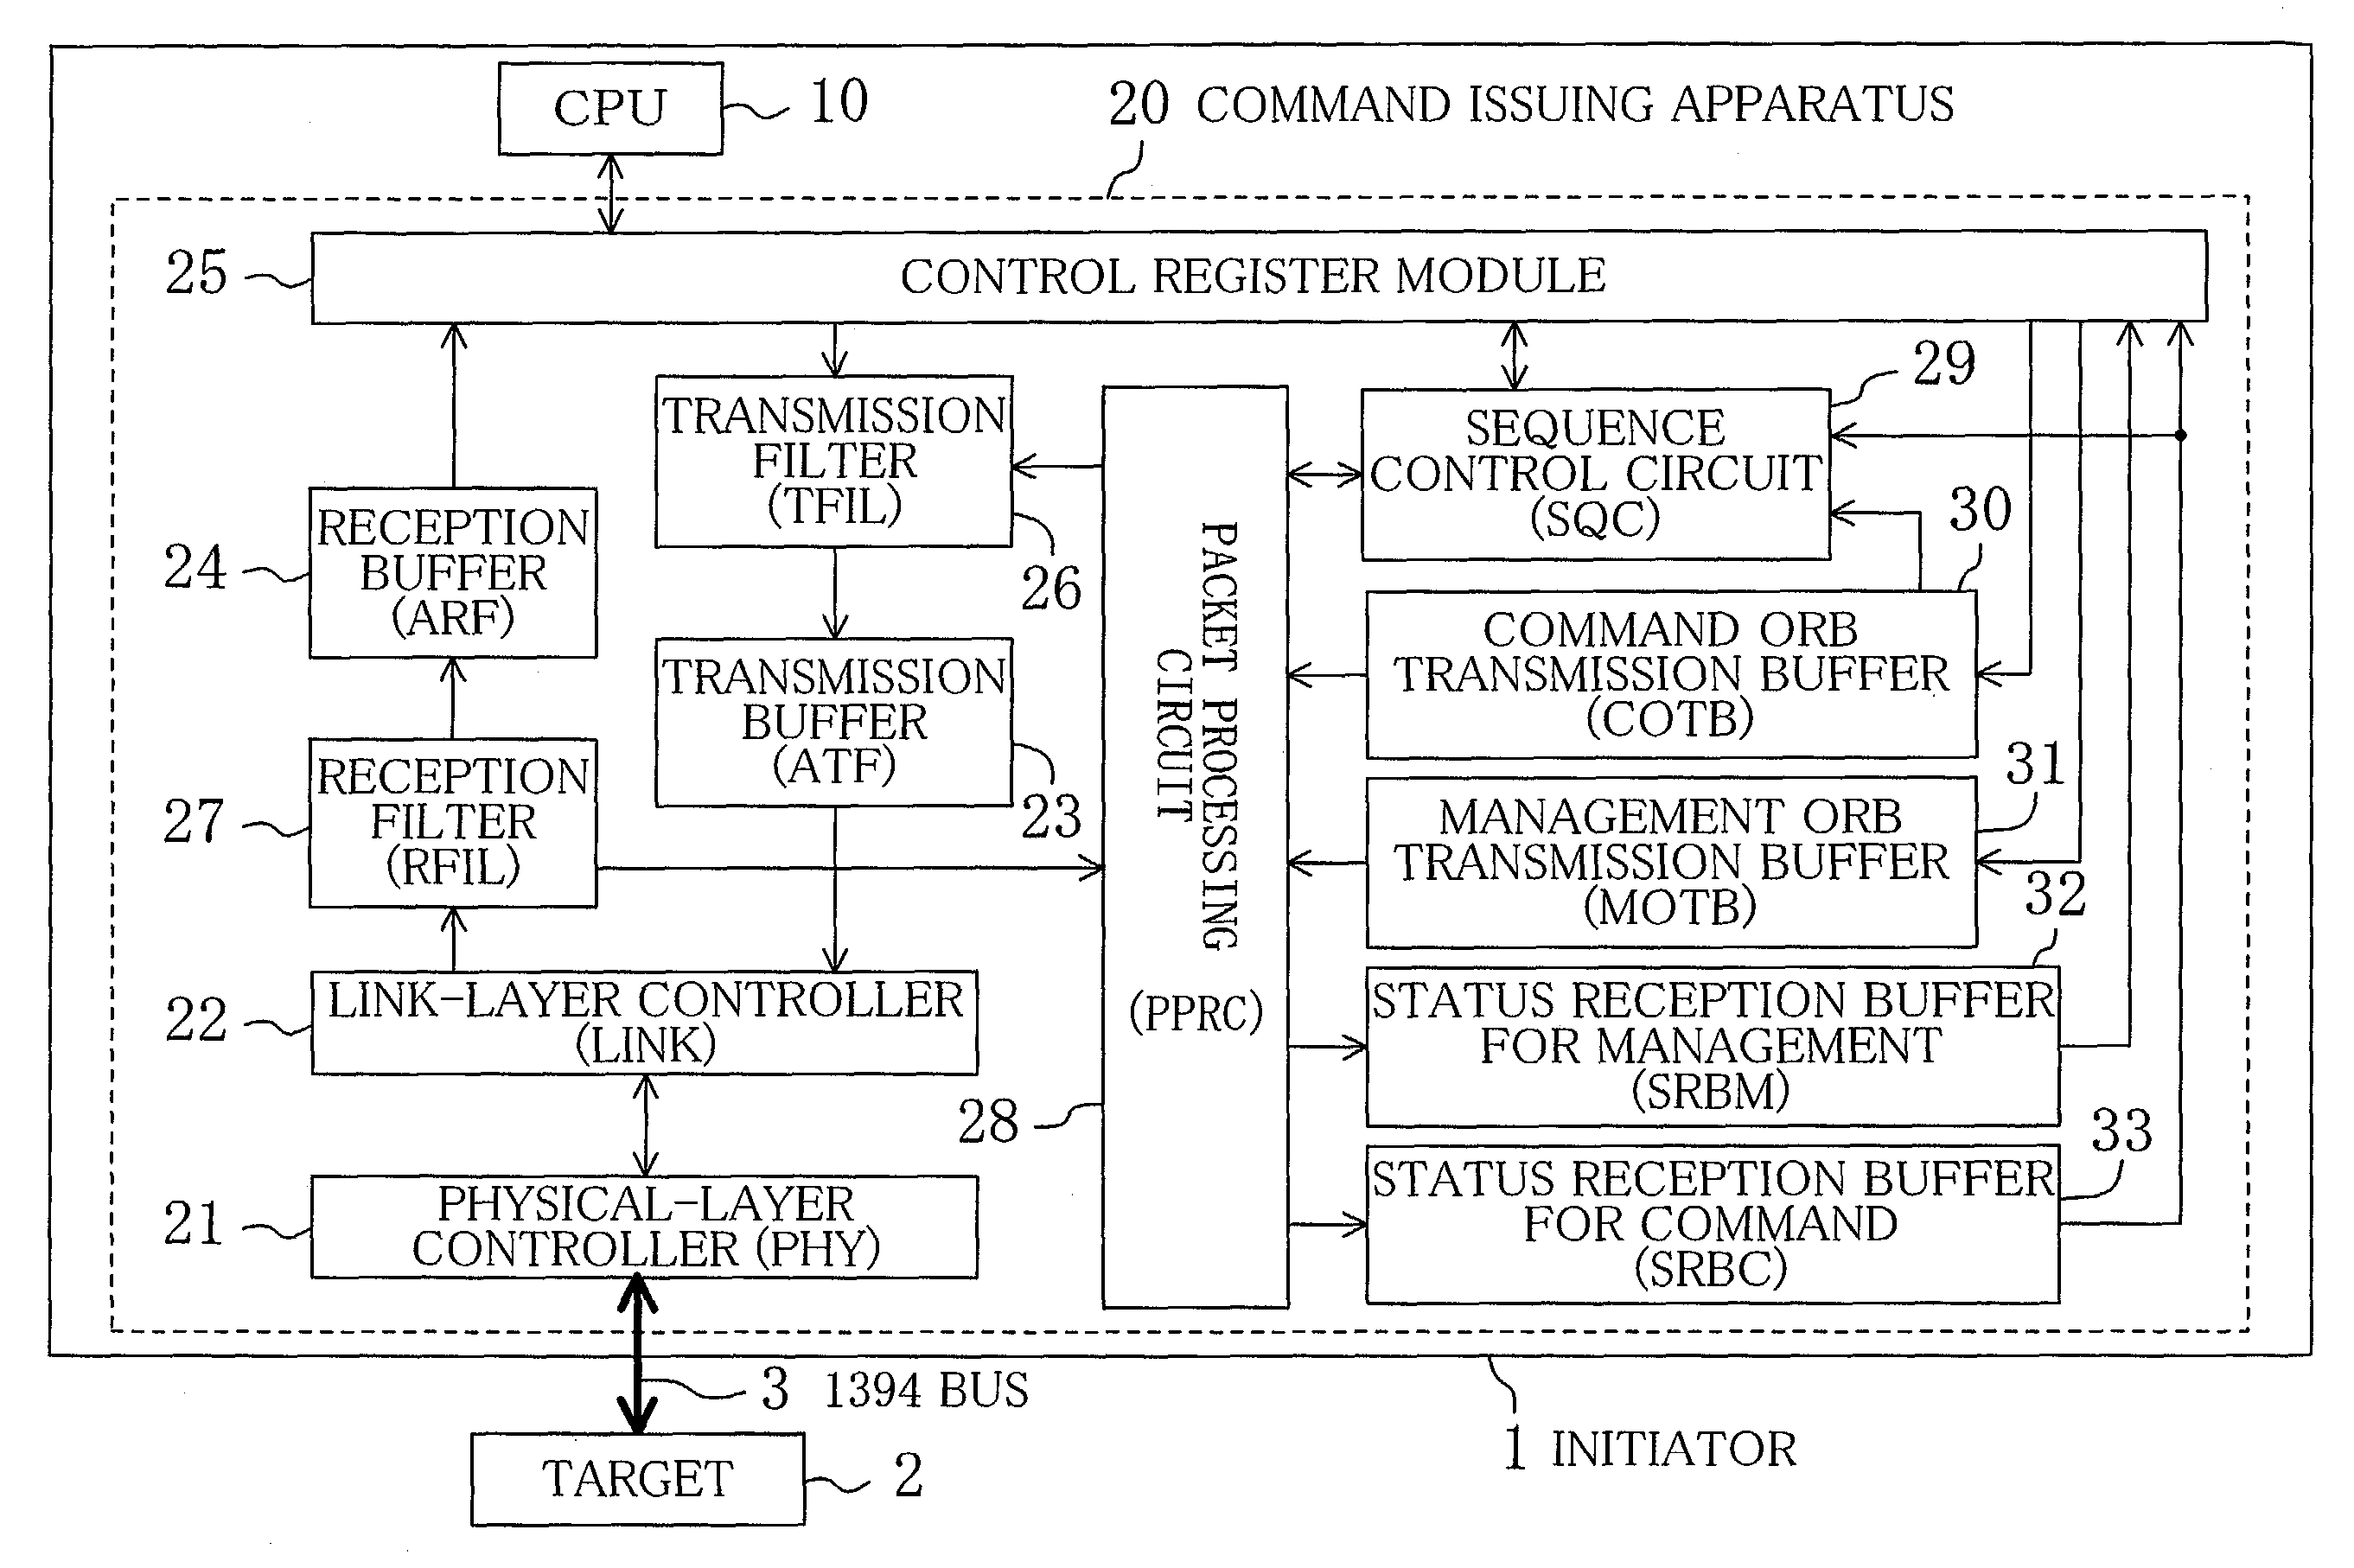 Command issuing apparatus for high-speed serial interface